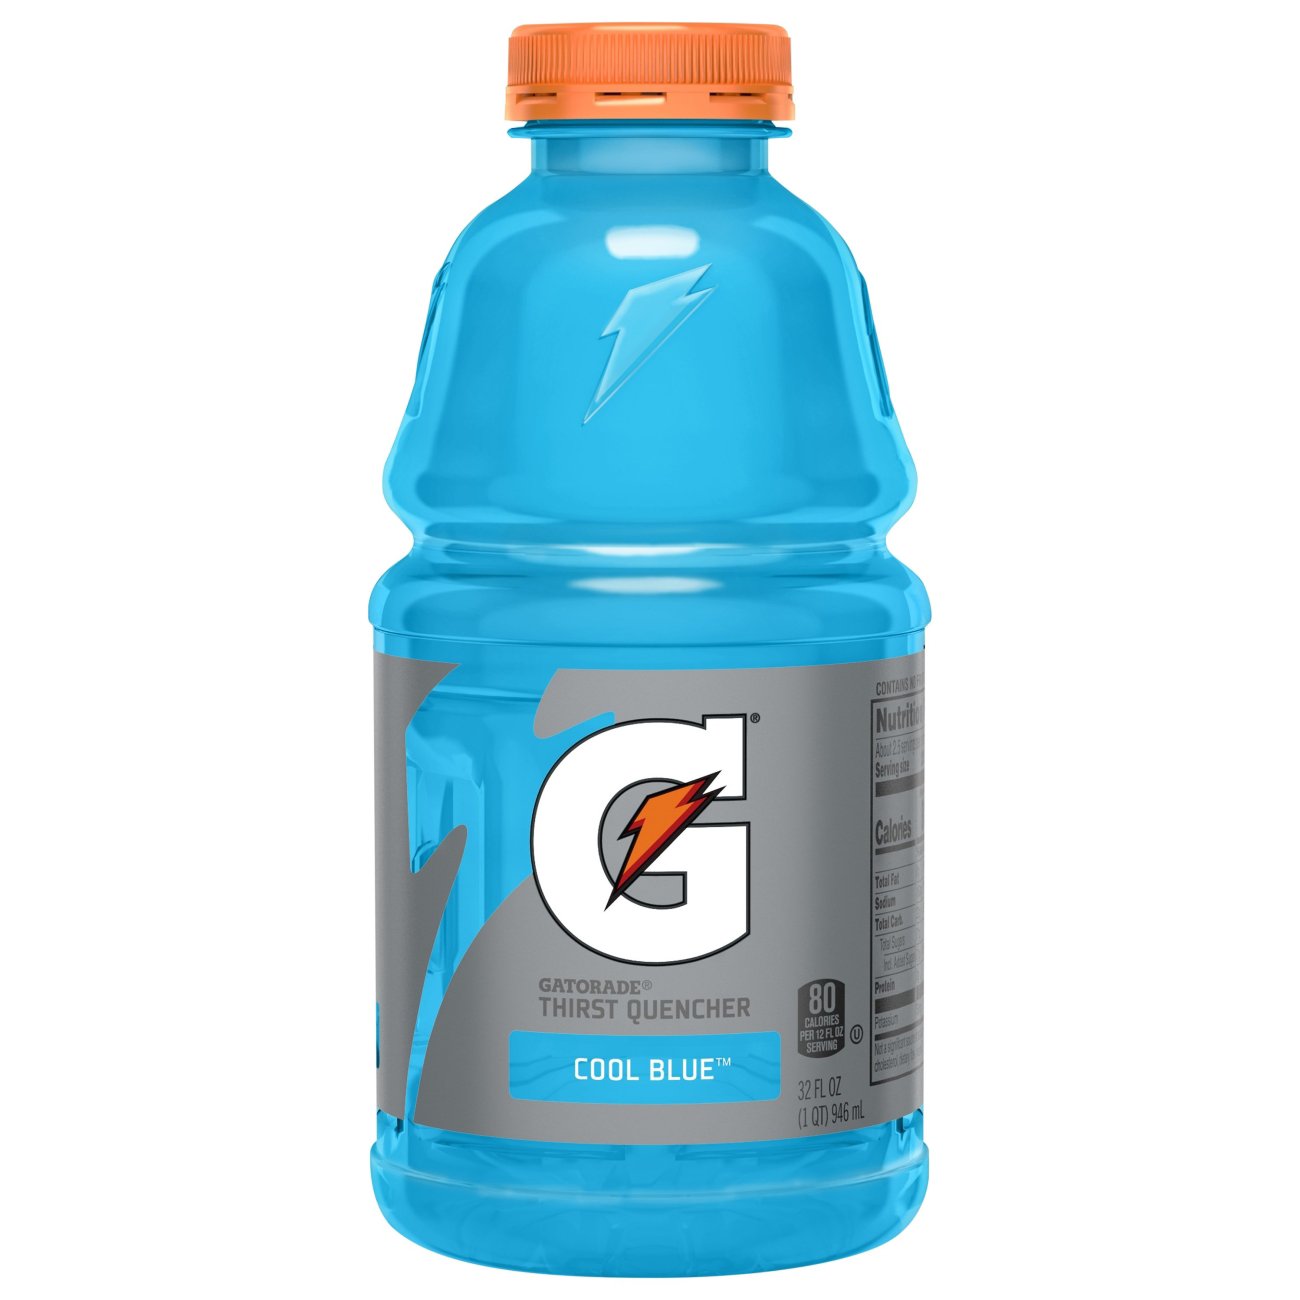 Gatorade Cool Blue Thirst Quencher Shop Sports Energy Drinks At H E B